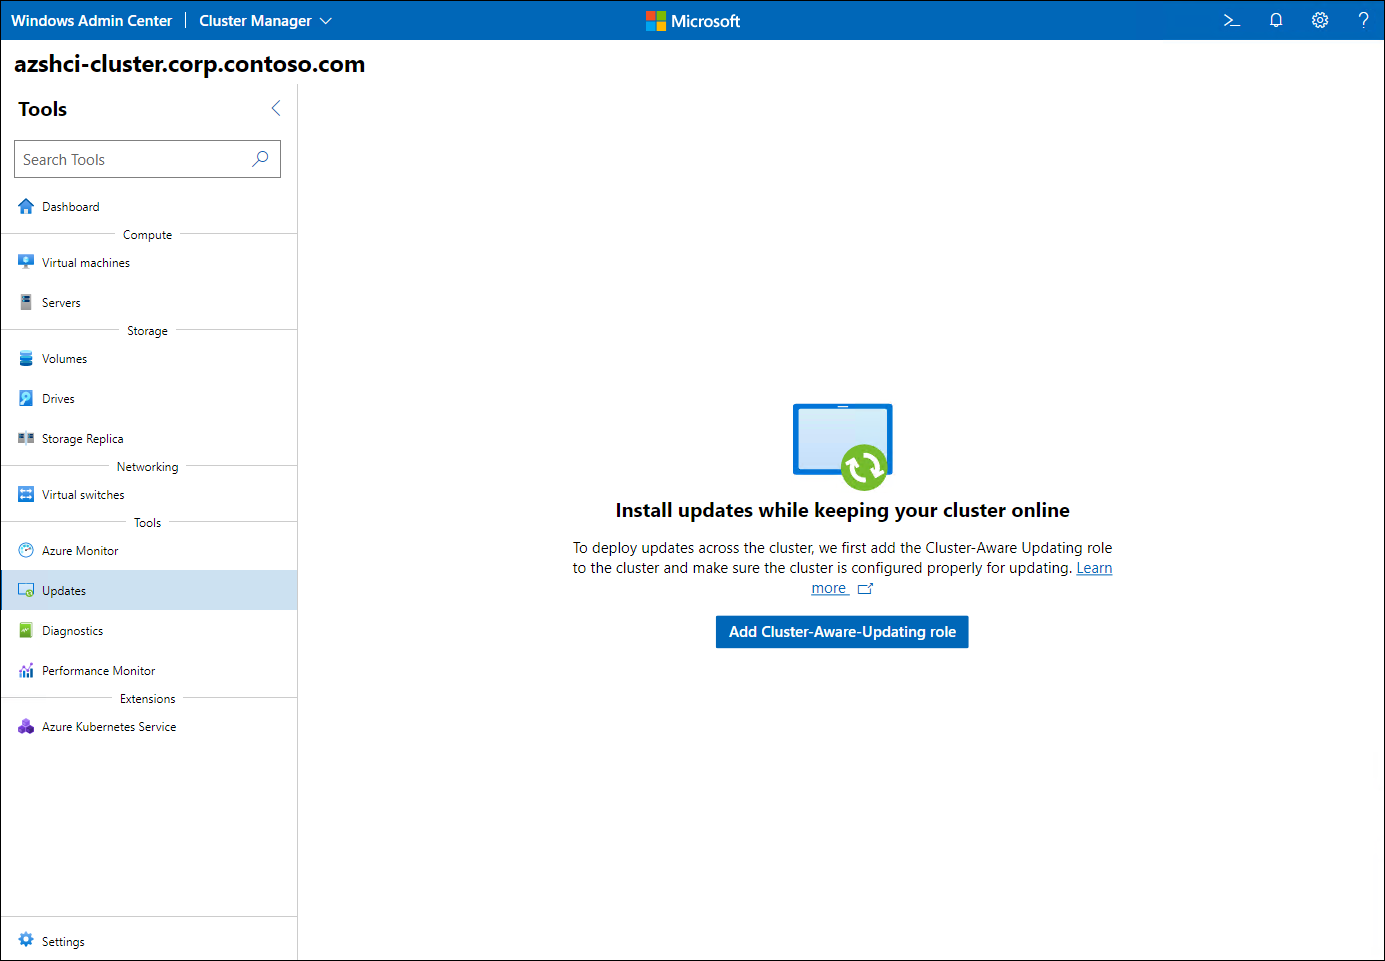 The screenshot depicts the initial prompt for configuration of CAU in the Windows Admin Center interface.